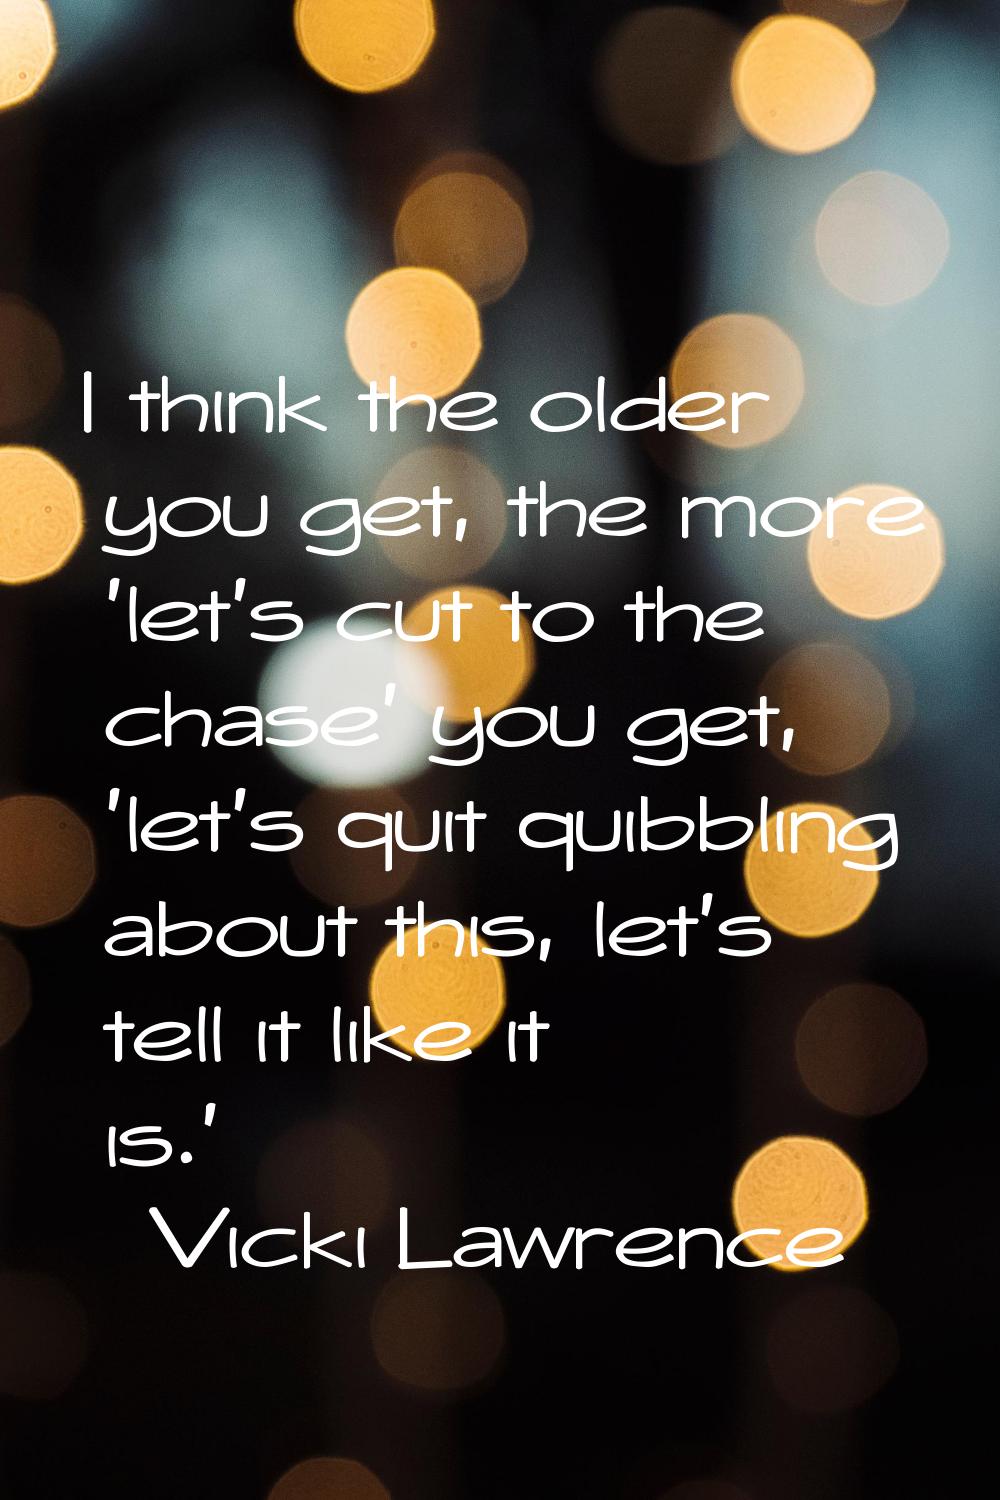 I think the older you get, the more 'let's cut to the chase' you get, 'let's quit quibbling about t